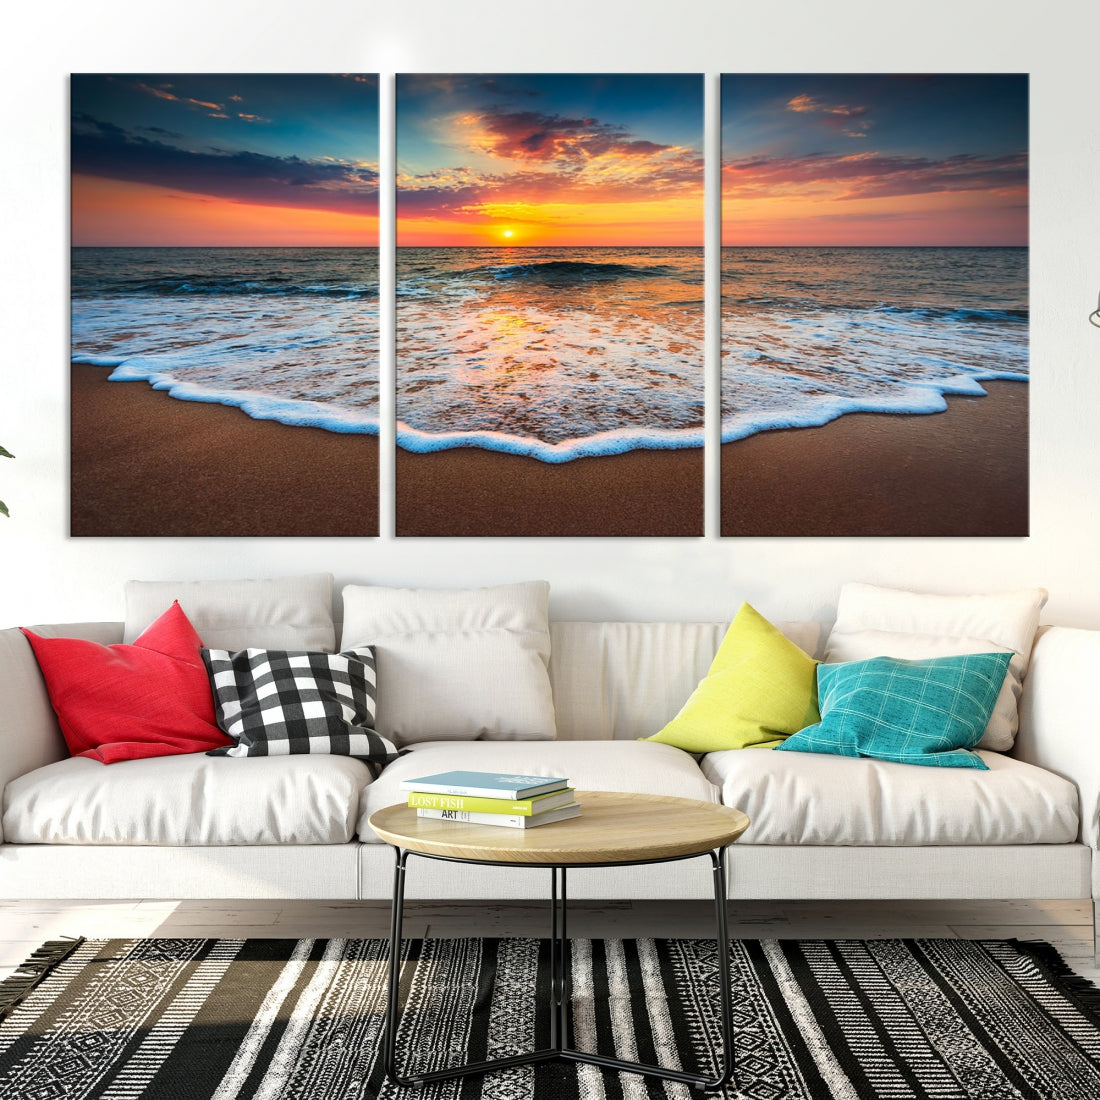 Fishing Tackle Canvas Paintings Wall Decor Living Room 5 Piece